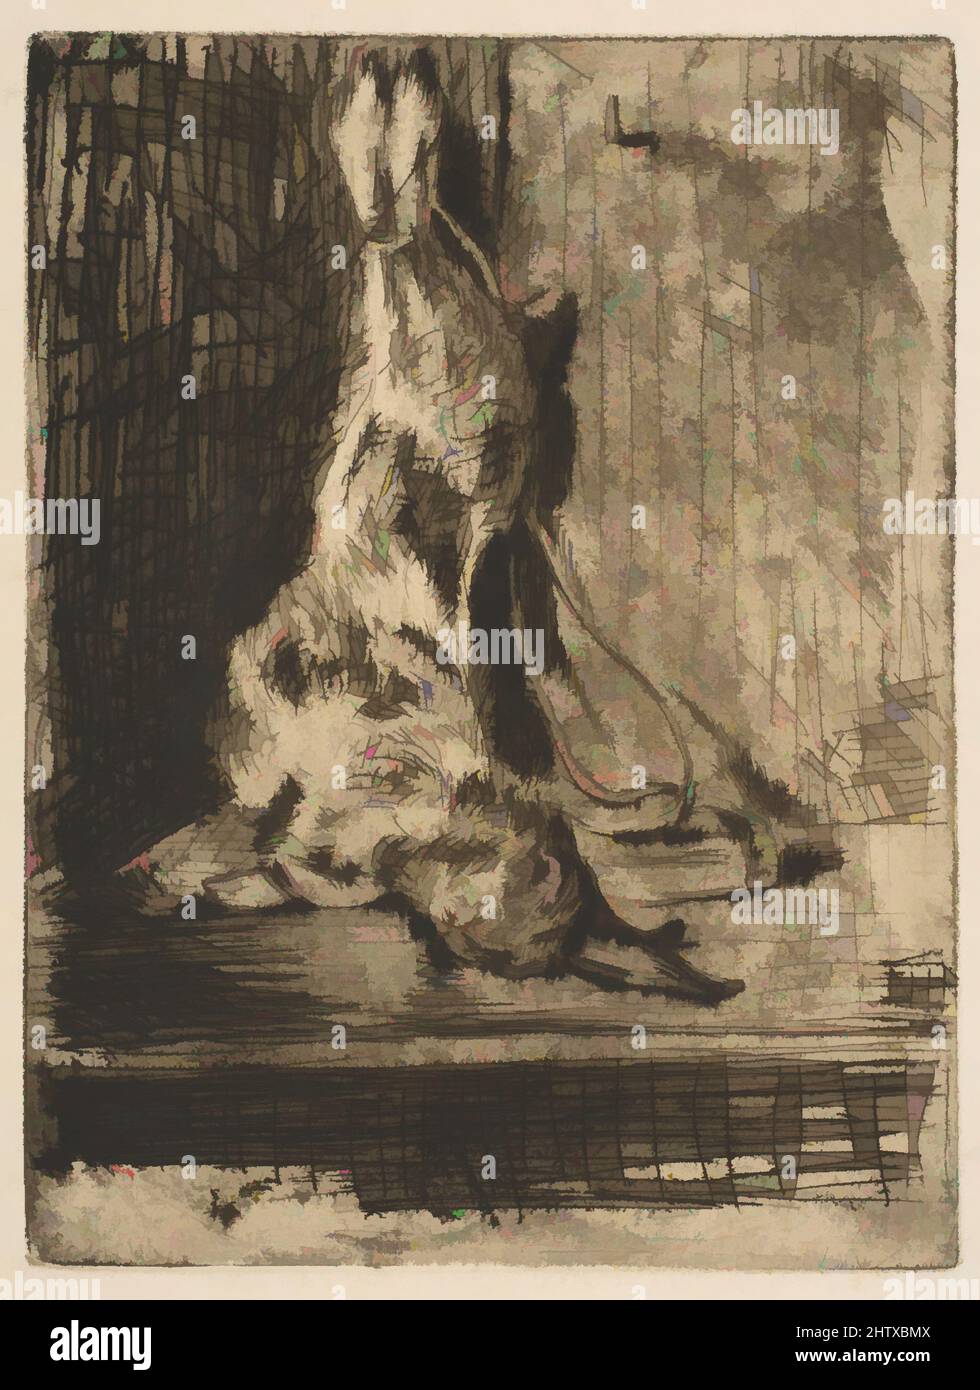 Art inspired by The Rabbit, 1866, Etching, drypoint, and bitten tone on laid paper (watermark: Hudelist), only state, plate: 5 1/4 x 4 in. (13.5 x 10.2 cm), Prints, Édouard Manet (French, Paris 1832–1883 Paris, Classic works modernized by Artotop with a splash of modernity. Shapes, color and value, eye-catching visual impact on art. Emotions through freedom of artworks in a contemporary way. A timeless message pursuing a wildly creative new direction. Artists turning to the digital medium and creating the Artotop NFT Stock Photo